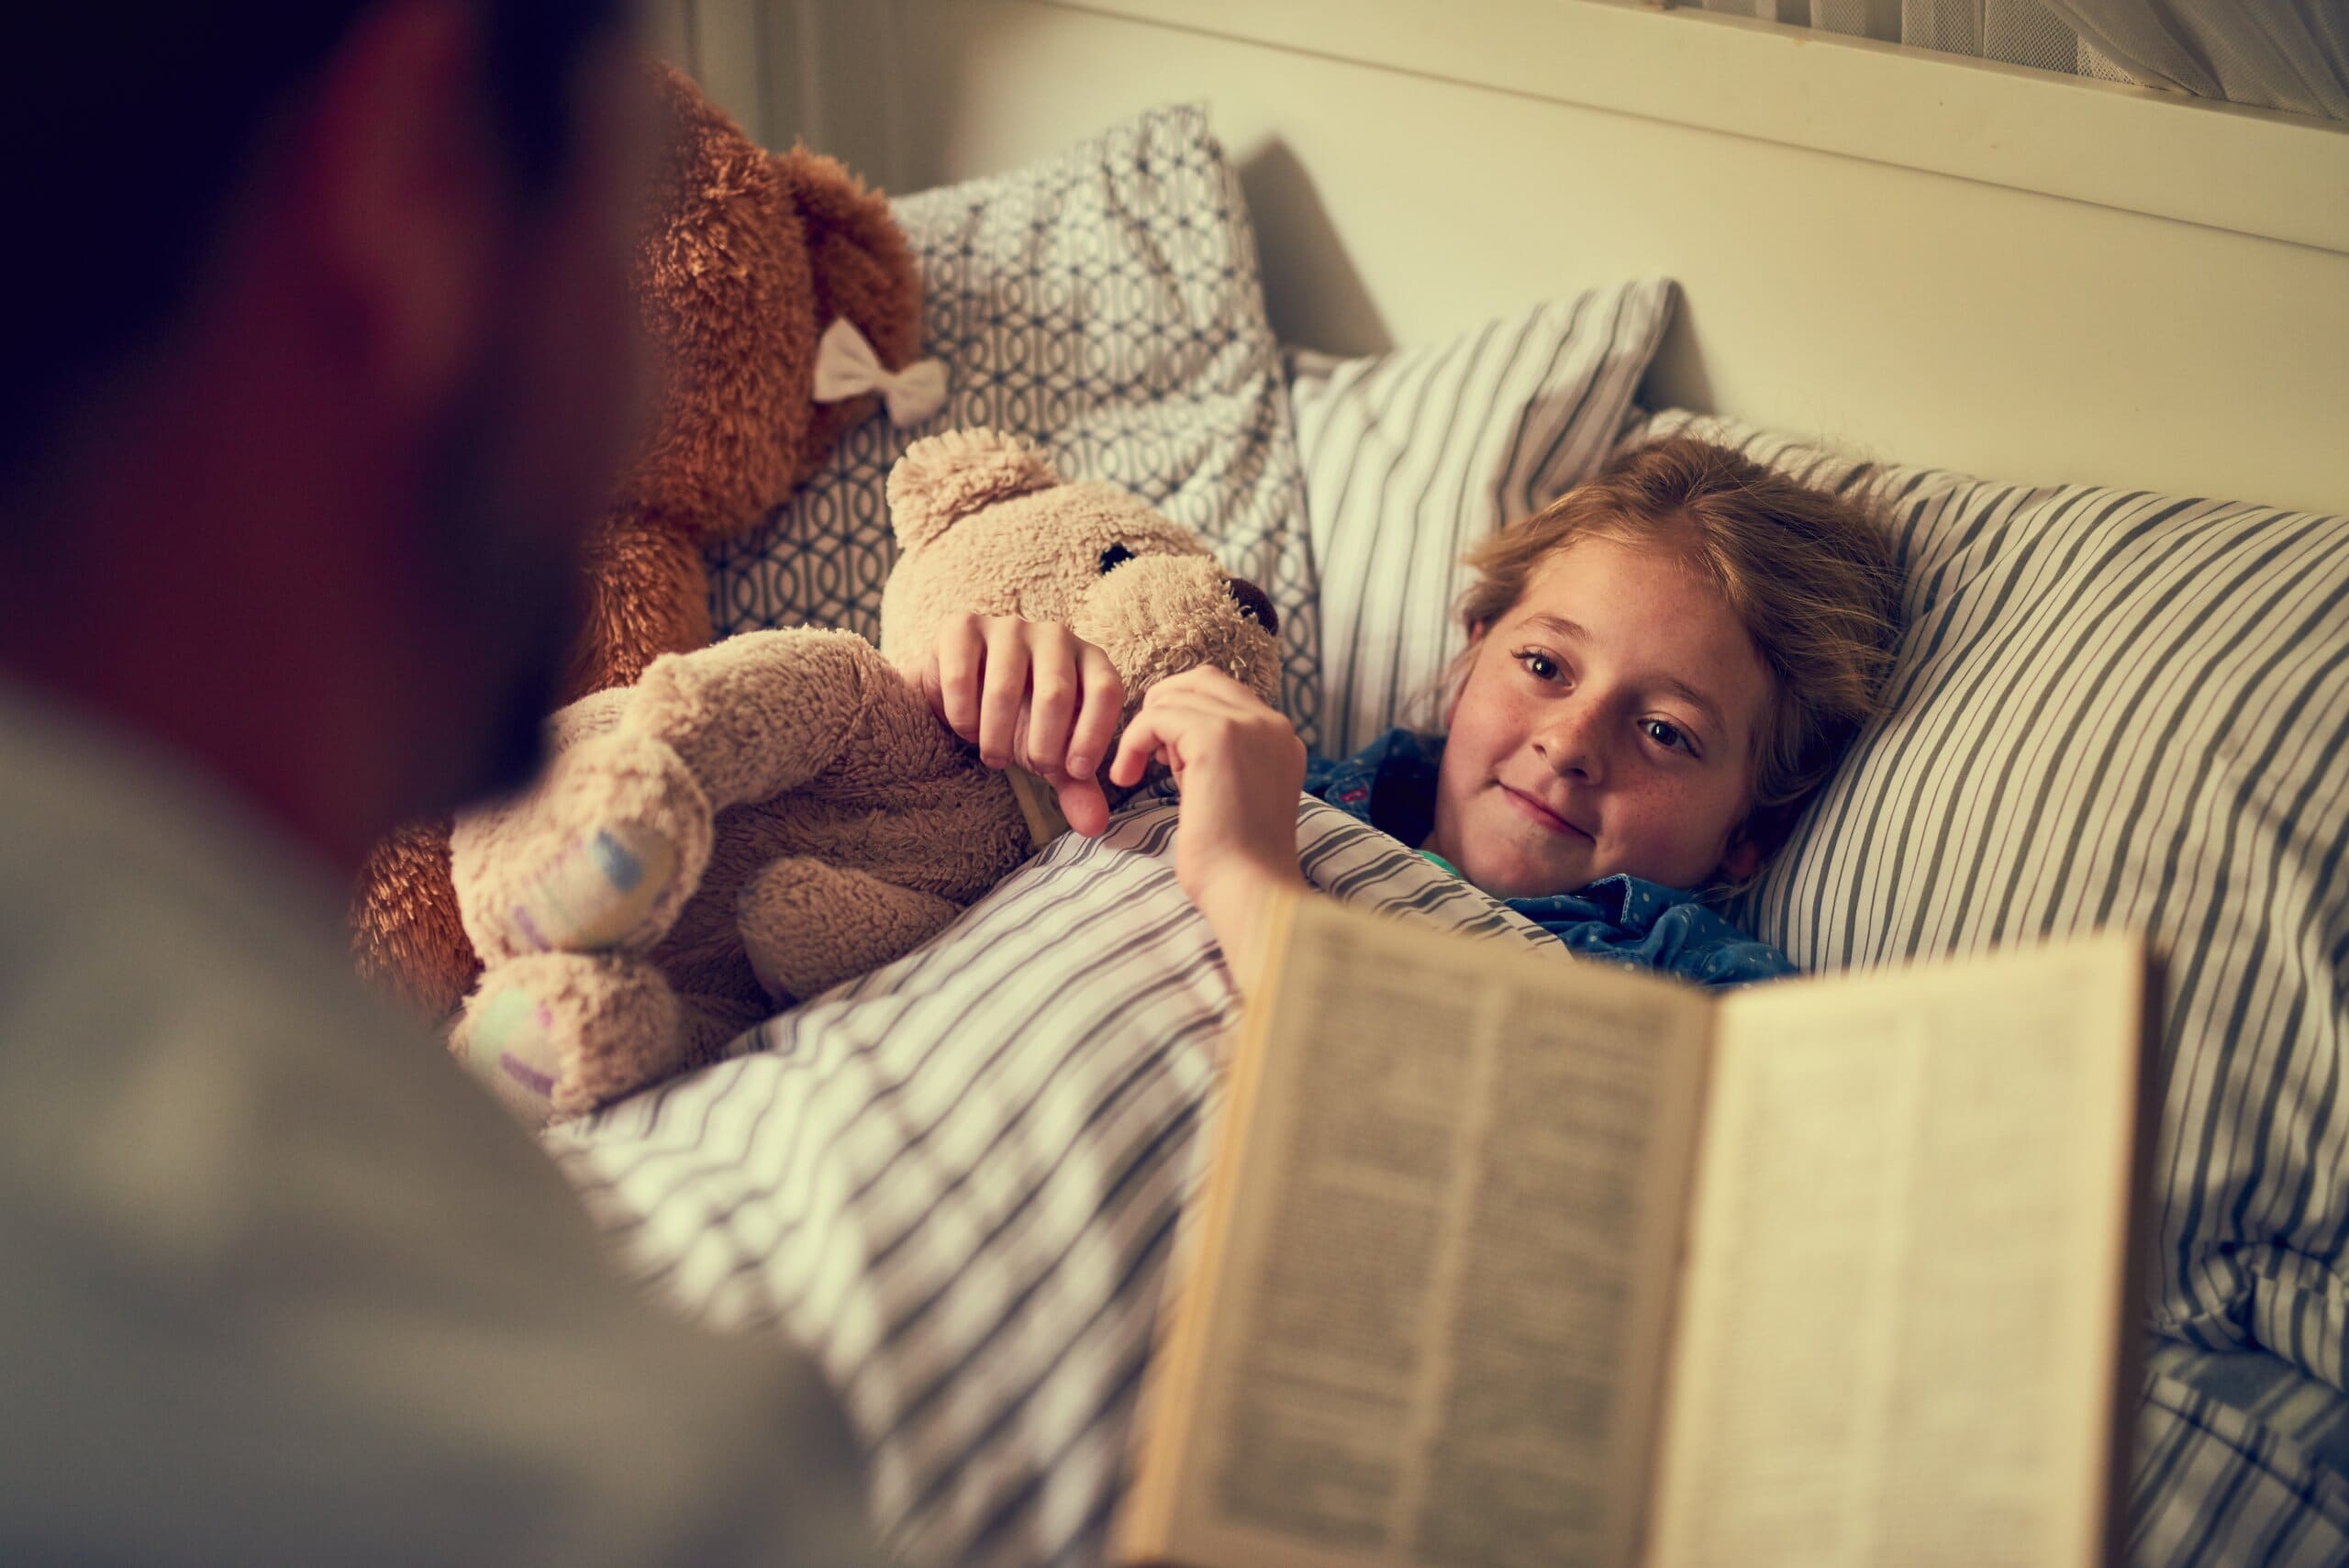 Father reading to a young girl snuggled up in bed with teddies.